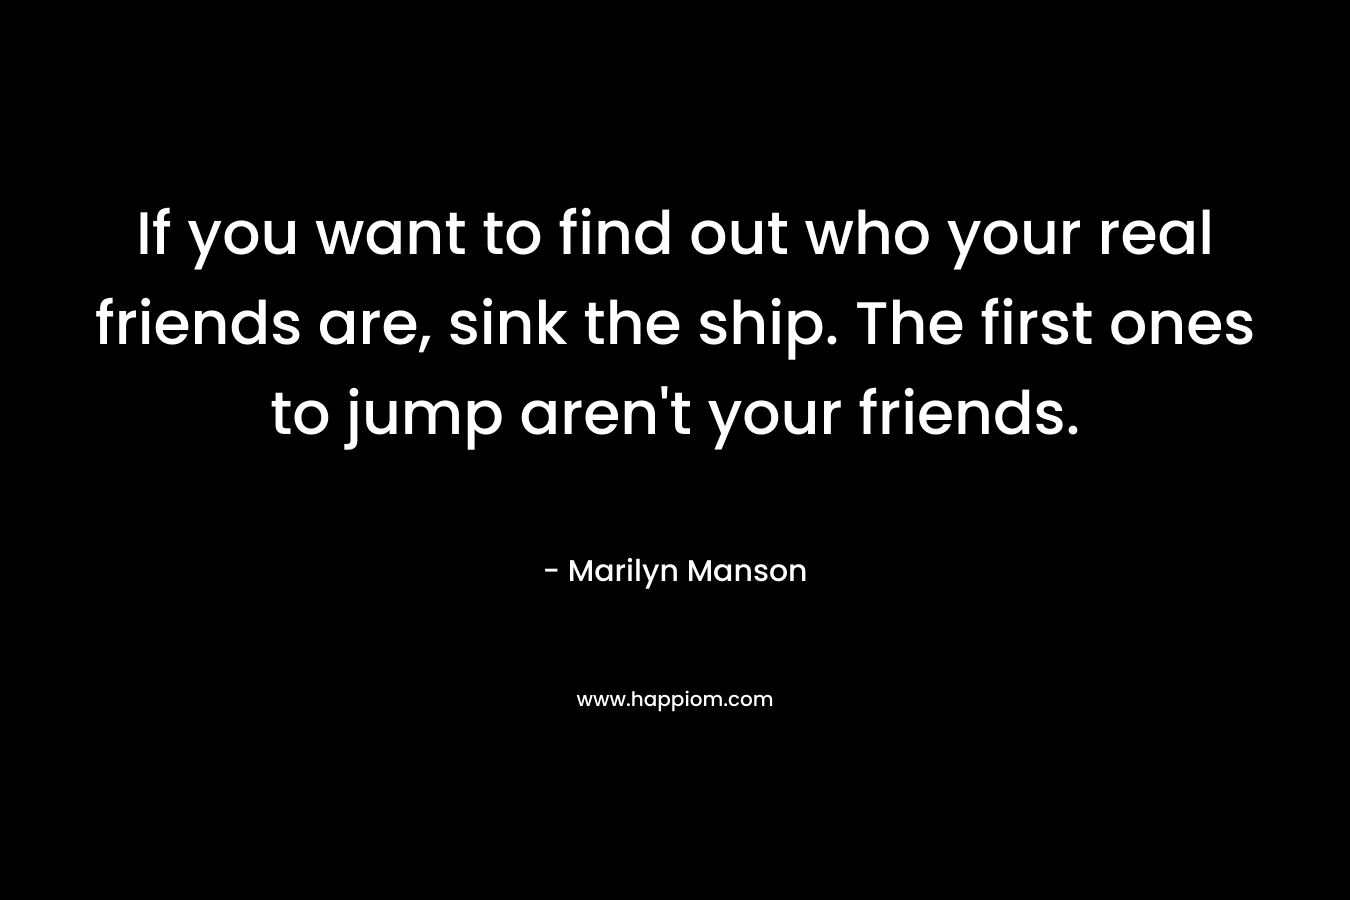 If you want to find out who your real friends are, sink the ship. The first ones to jump aren’t your friends. – Marilyn Manson